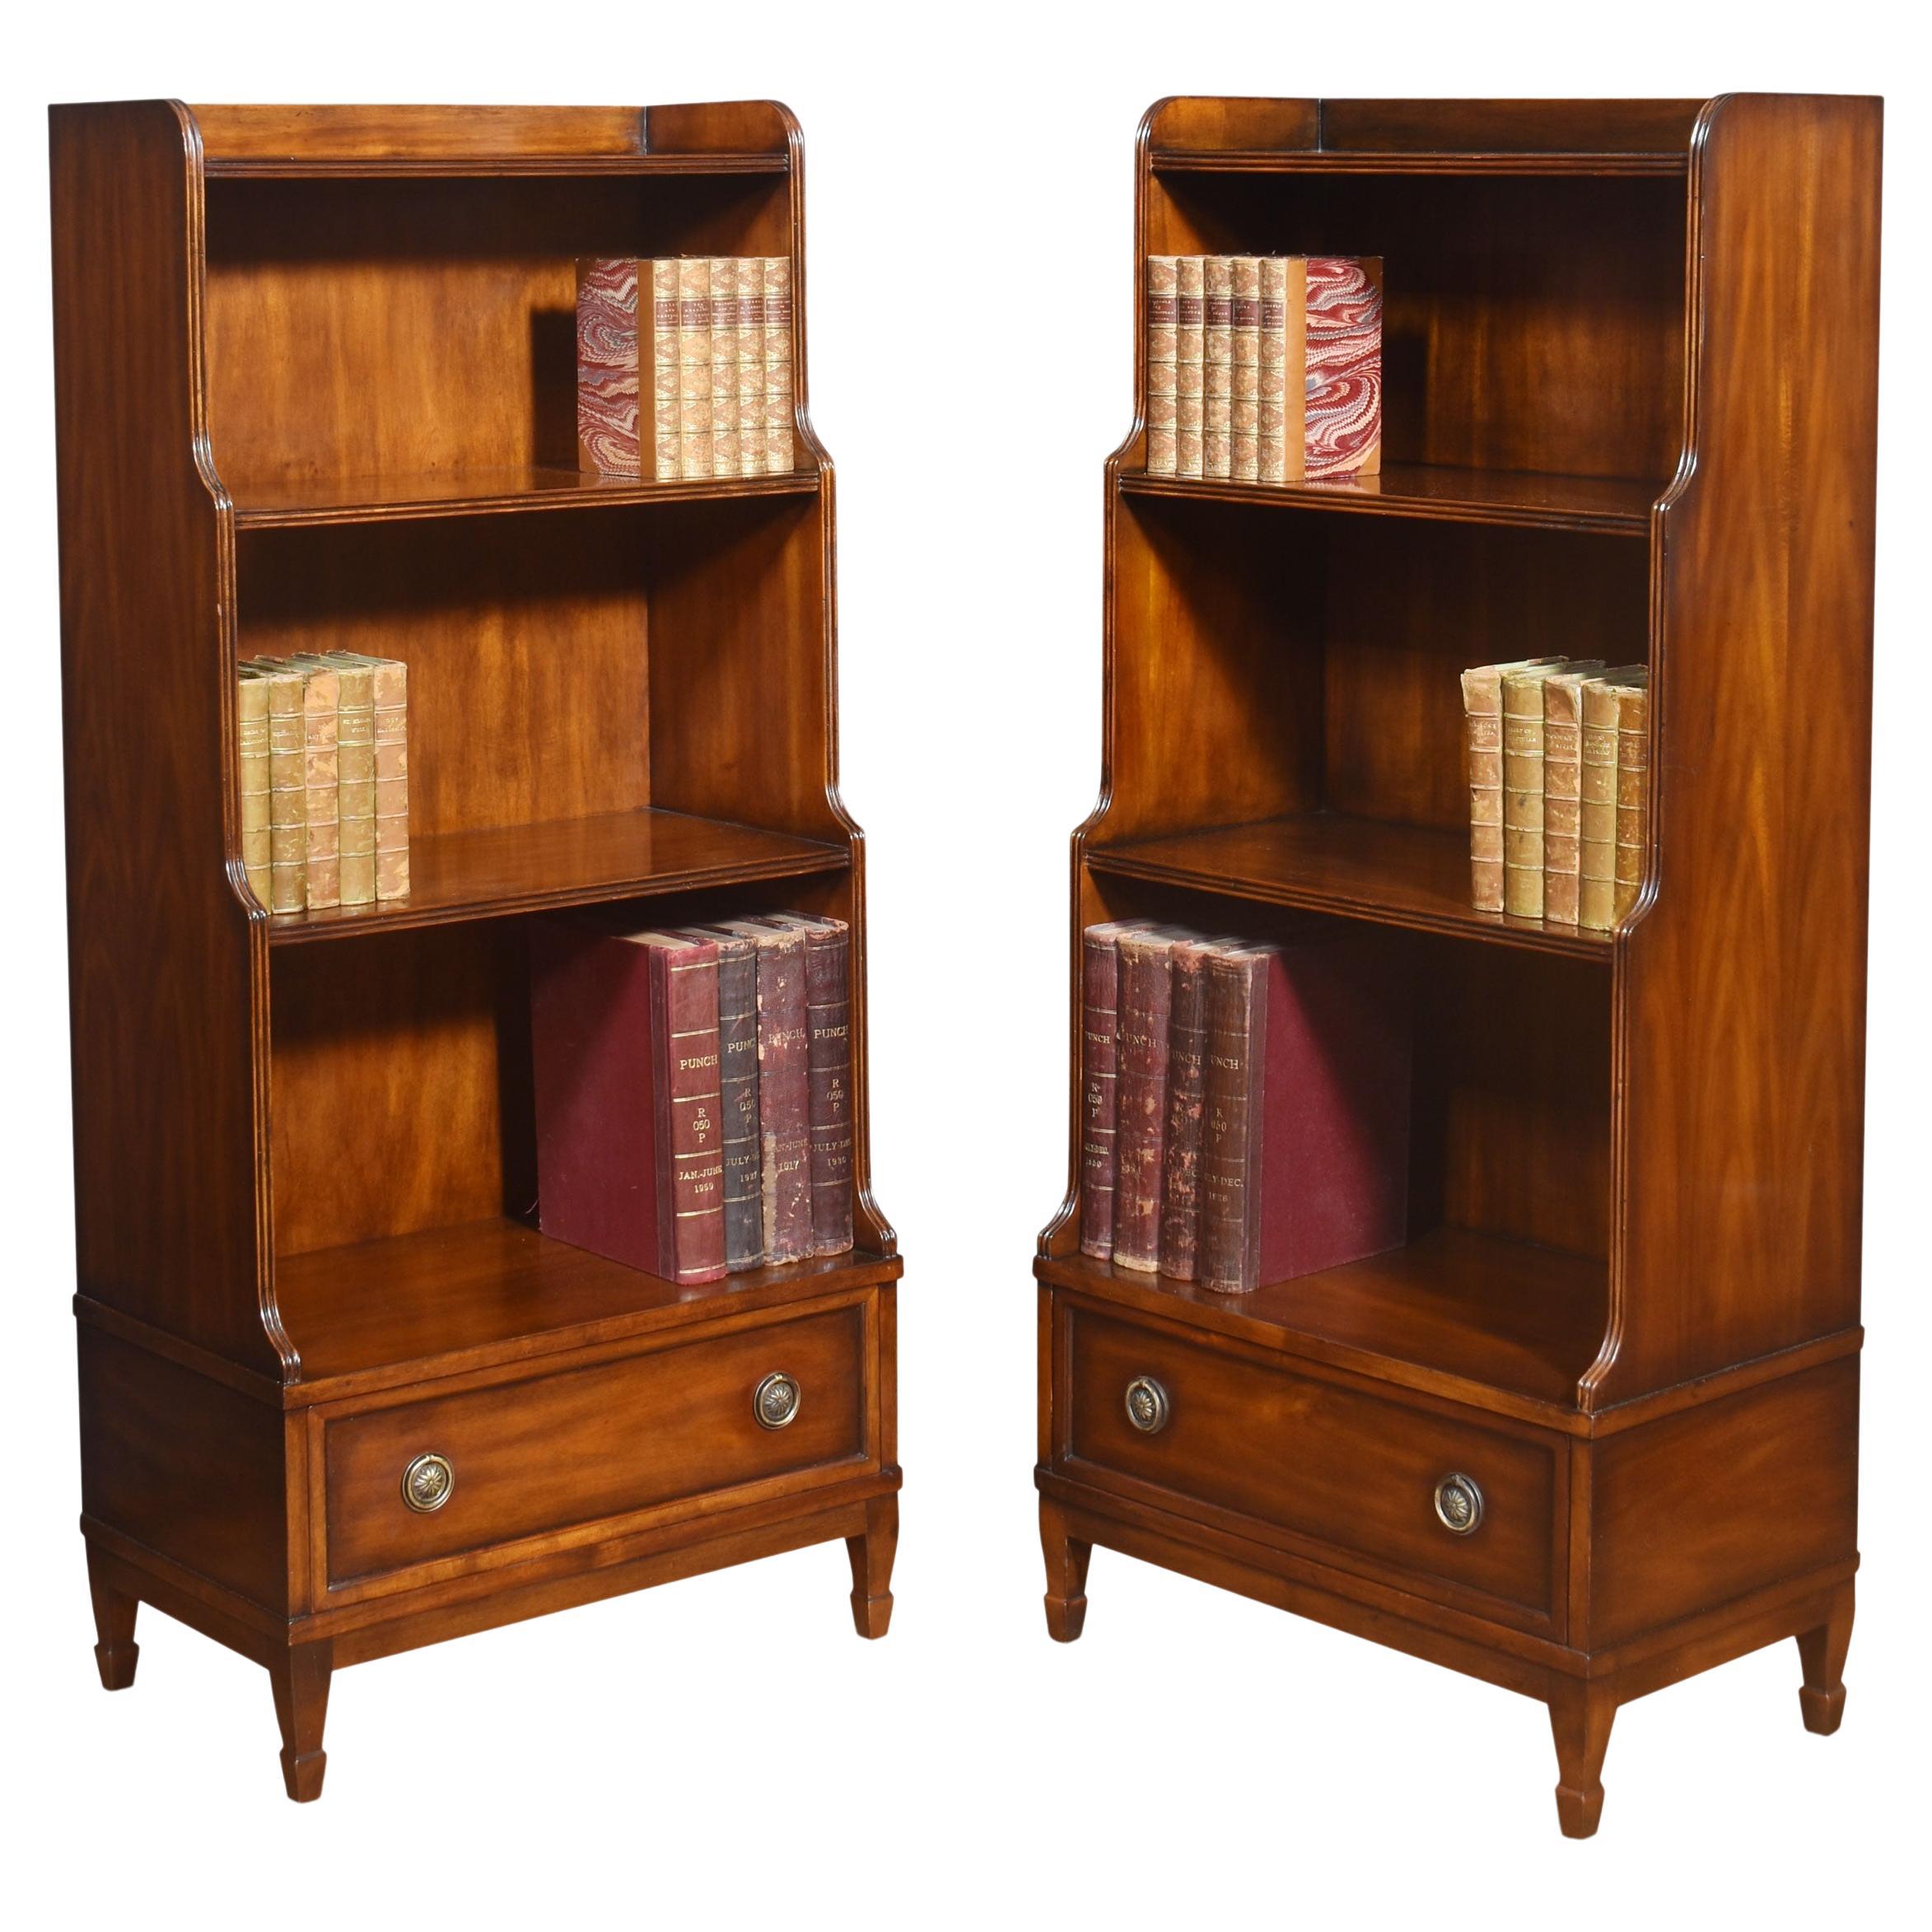 Pair of waterfall bookcases